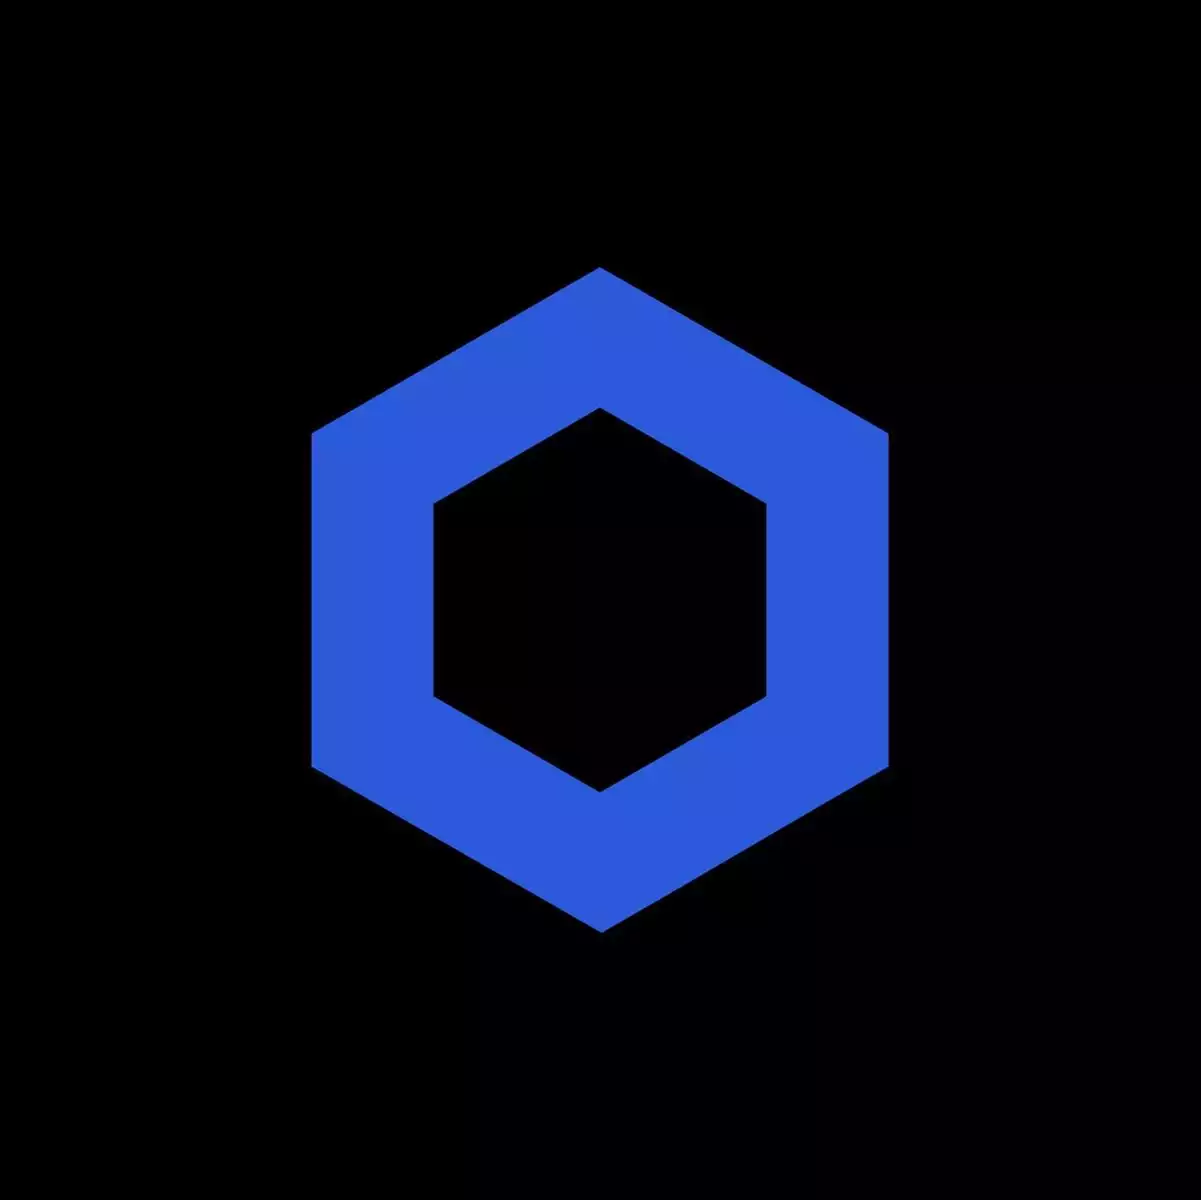 ainslie chainlink (link)chainlink uses what is called oracles to transfer information from off-blockchain sources onto on-blockchain smart contracts. ...